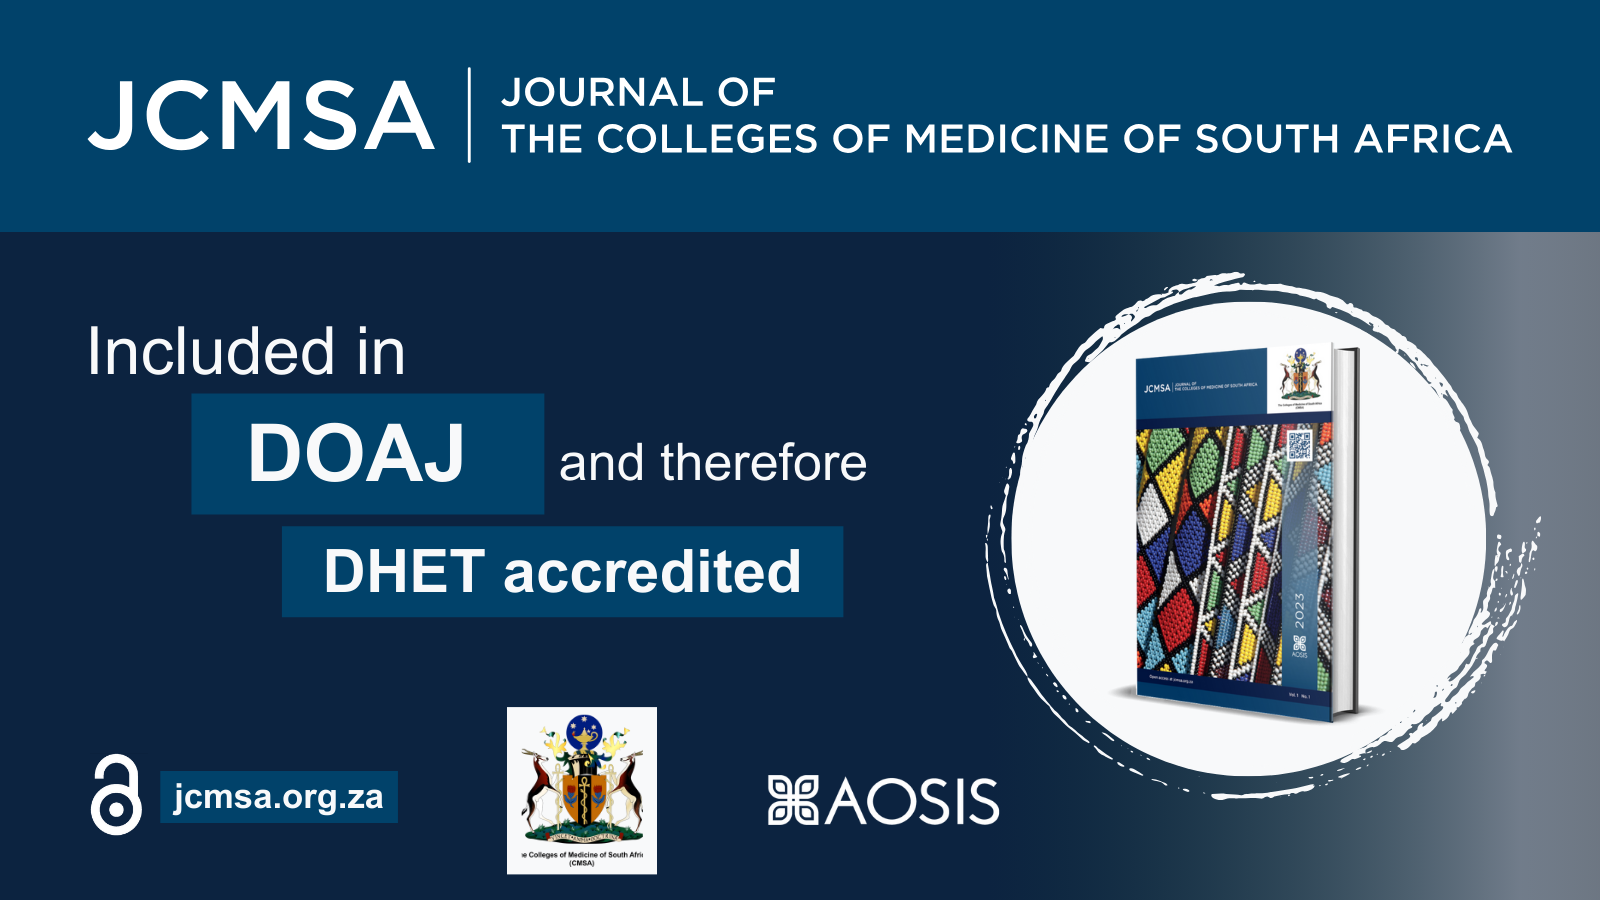 'Journal of the Colleges of Medicine of South Africa' (JCMSA) included in DOAJ